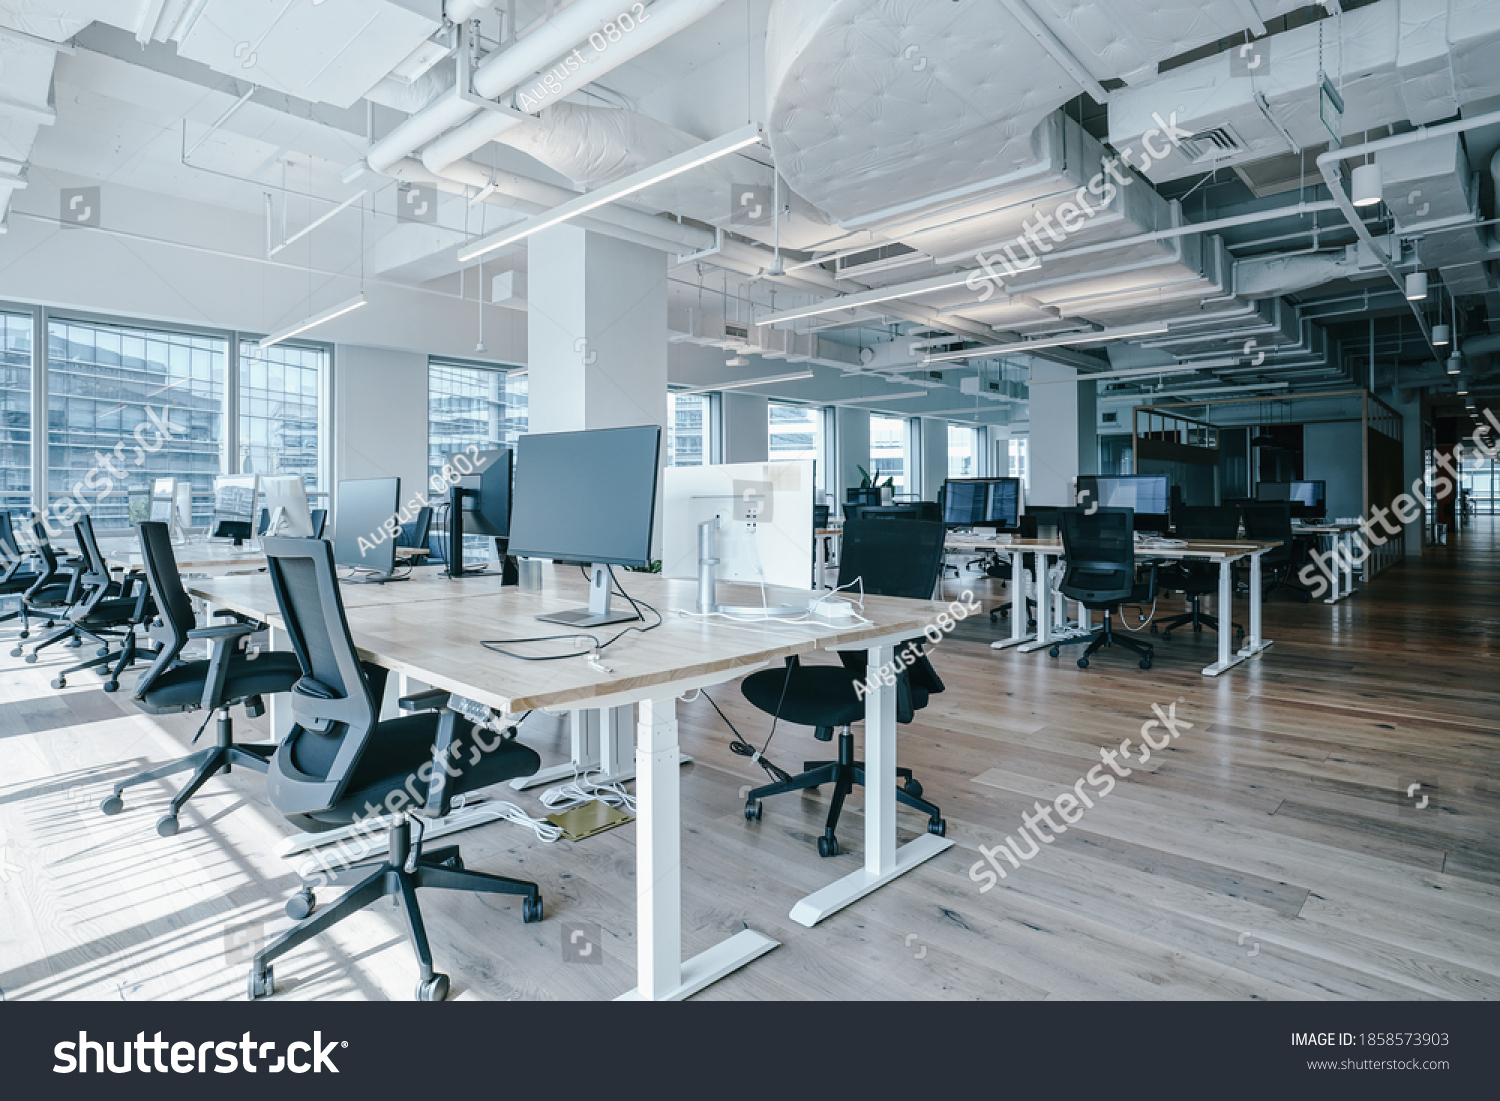 Interior of modern empty office building.Open white ceiling design with wooden floor. #1858573903